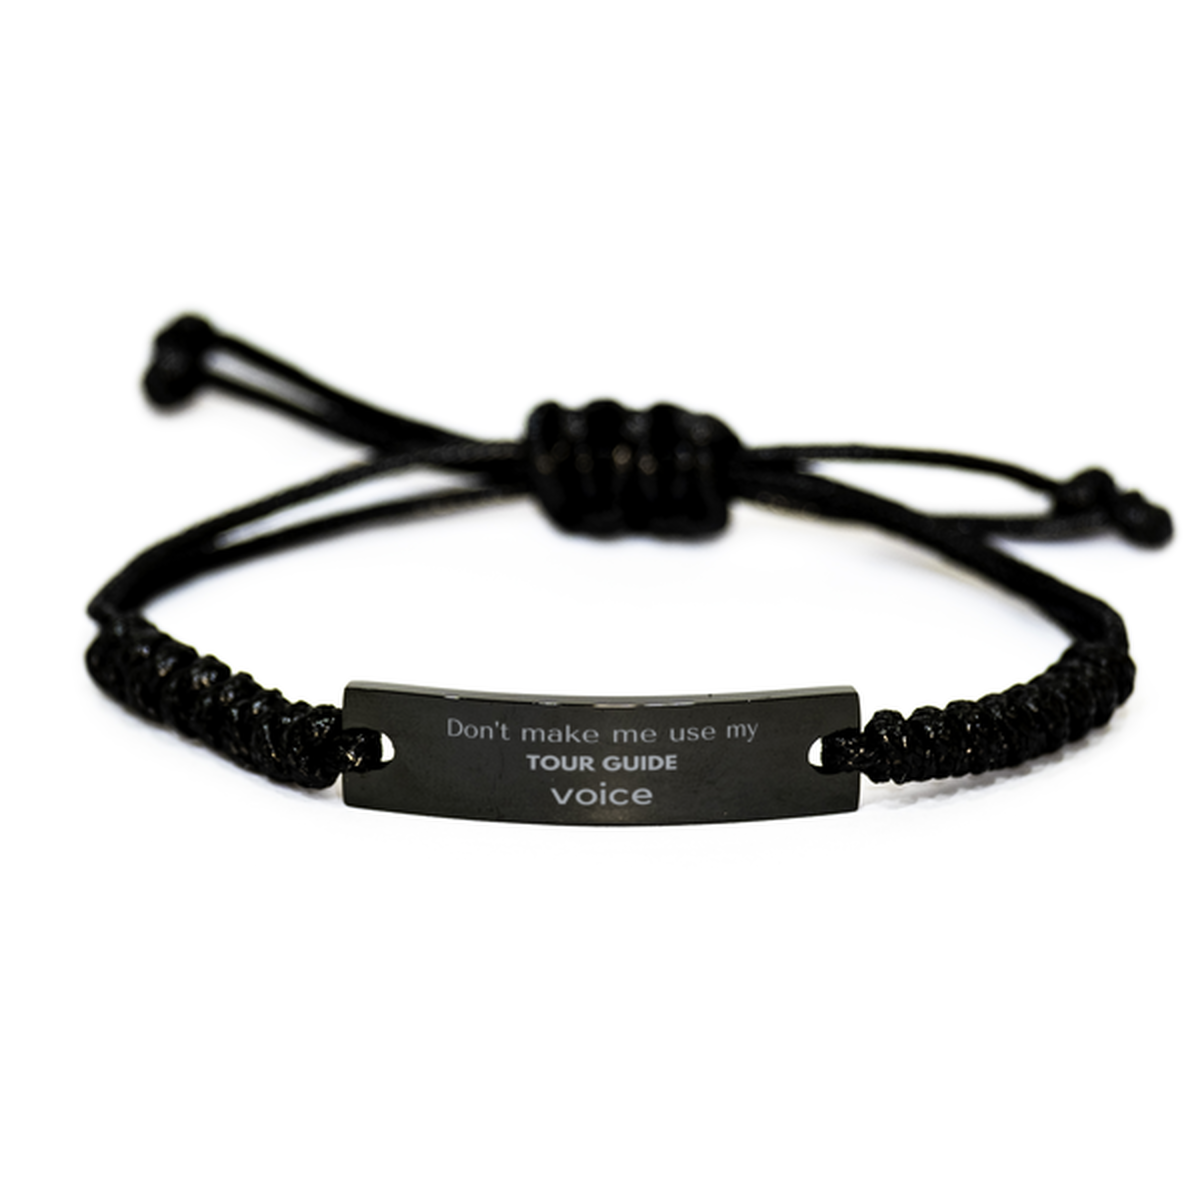 Don't make me use my Tour Guide voice, Sarcasm Tour Guide Gifts, Christmas Tour Guide Black Rope Bracelet Birthday Unique Gifts For Tour Guide Coworkers, Men, Women, Colleague, Friends